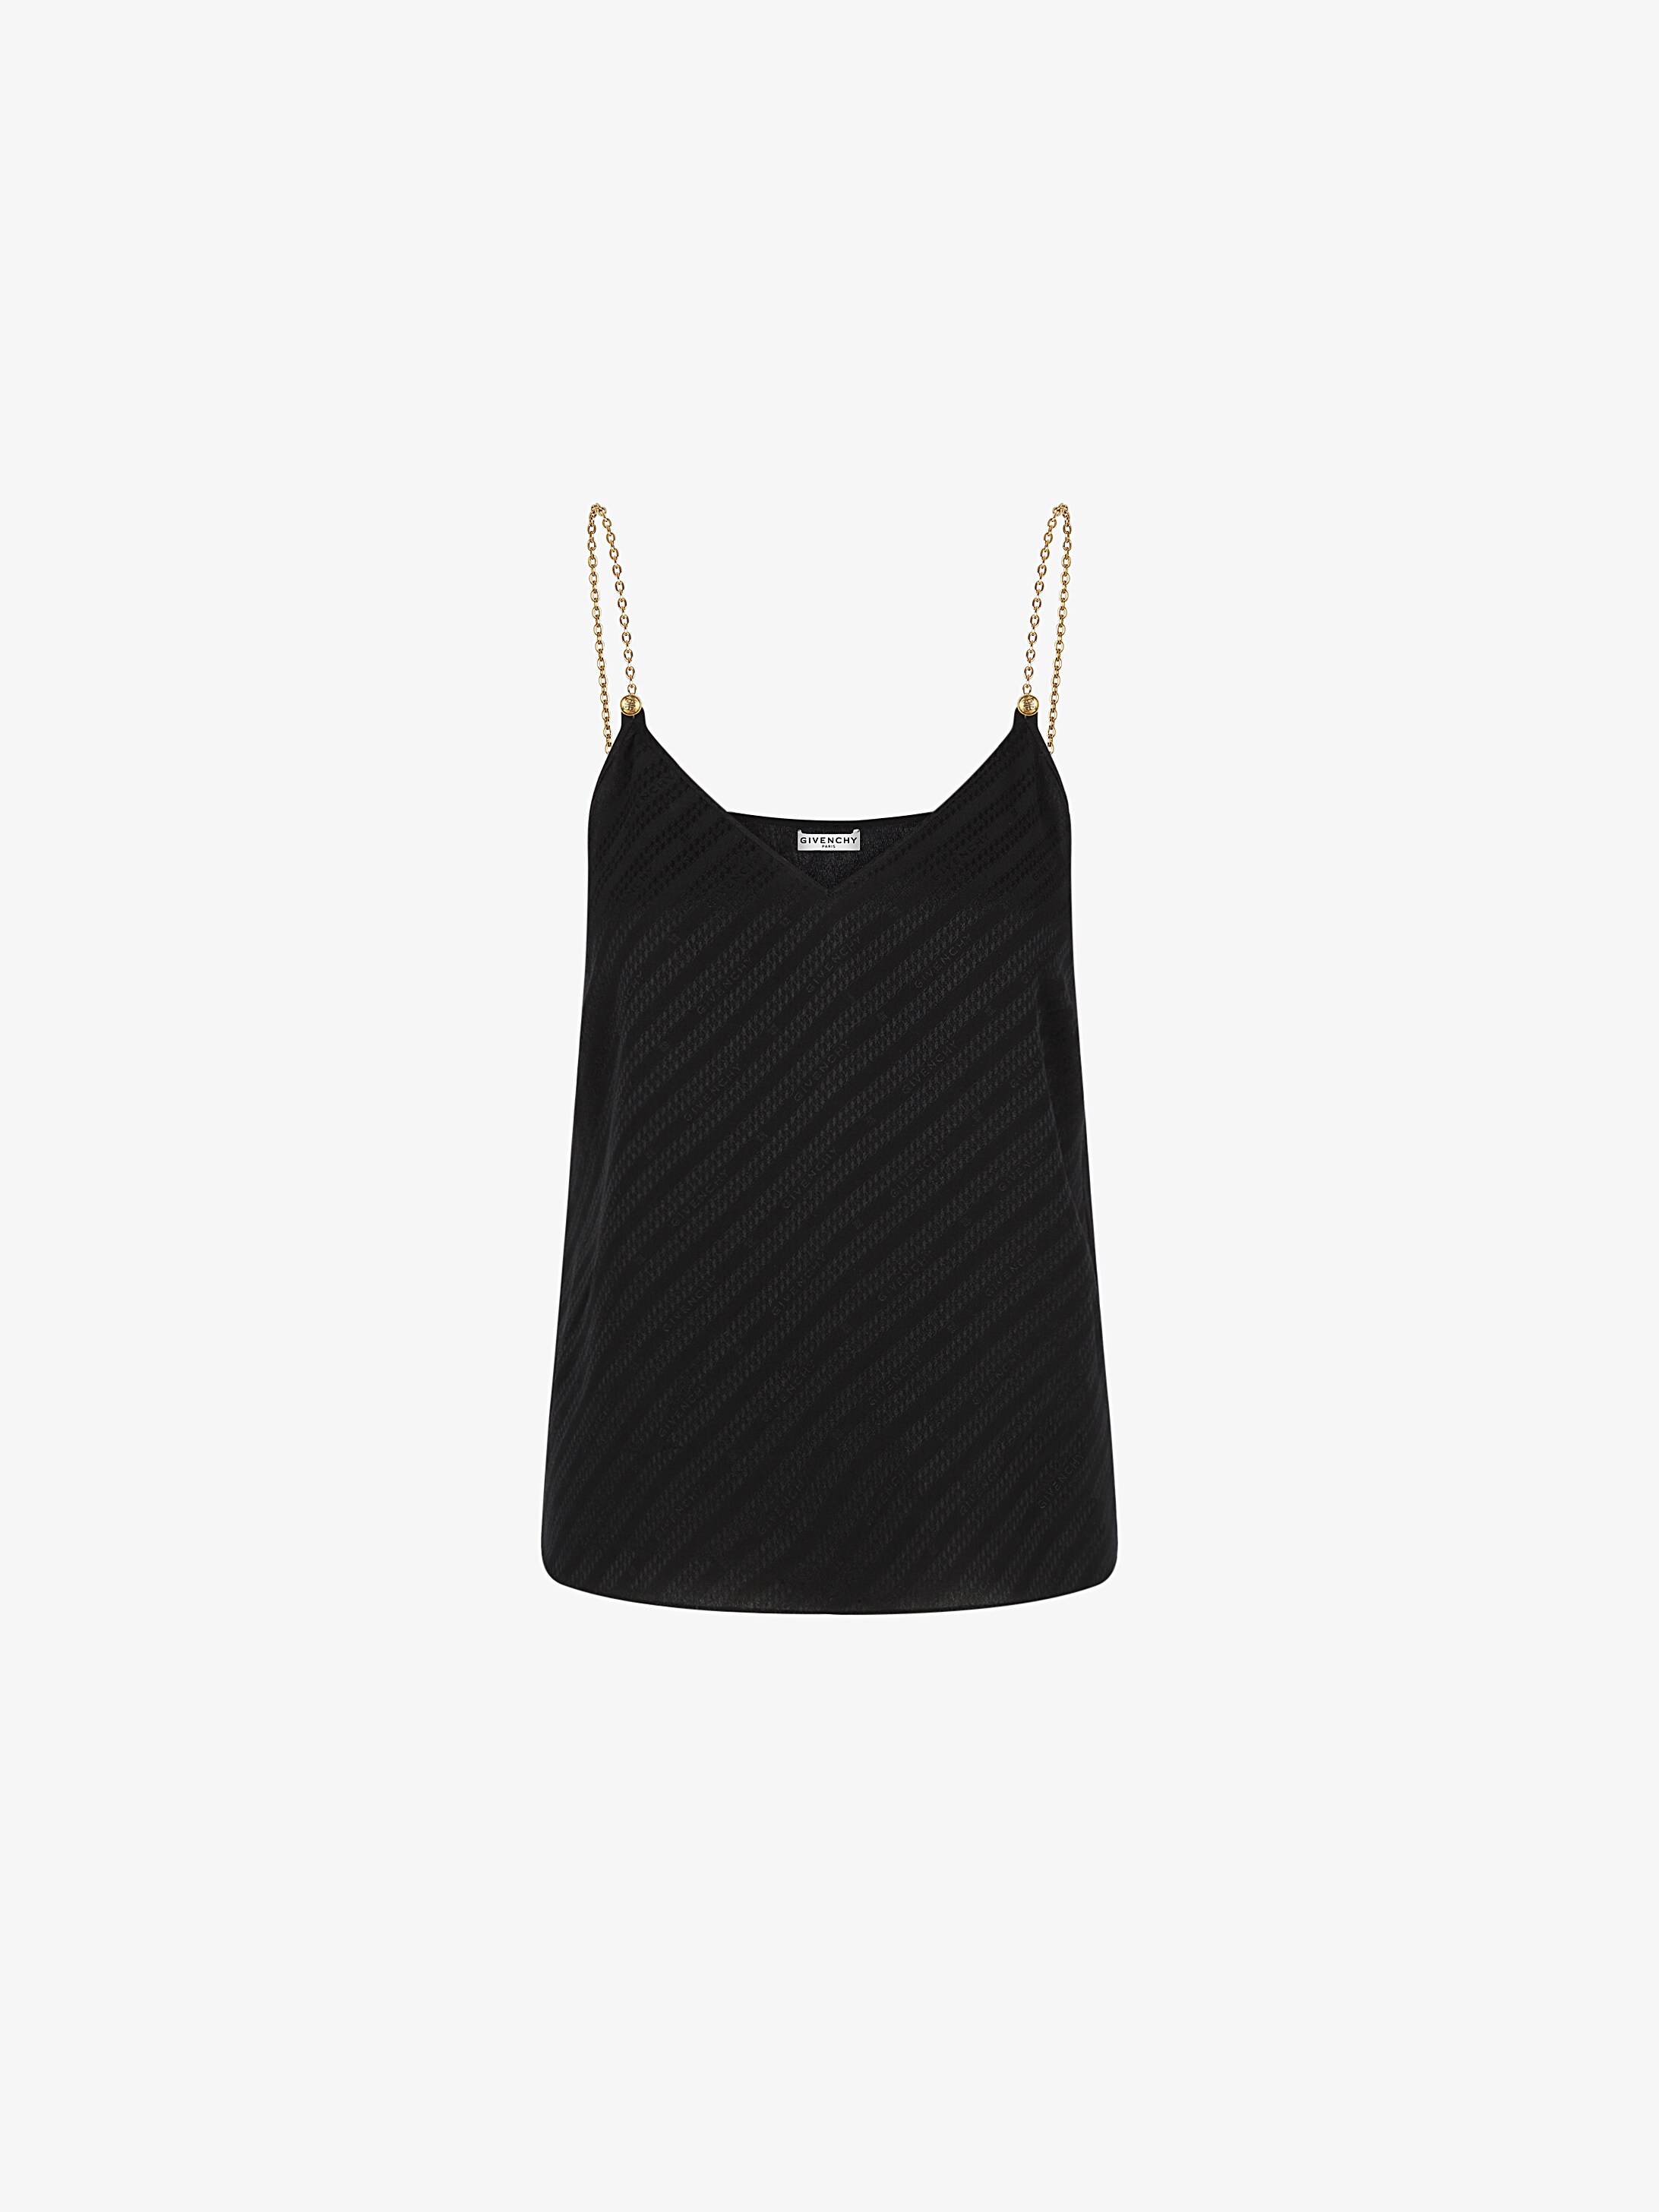 GIVENCHY chain camisole with chain shoulder straps | GIVENCHY Paris